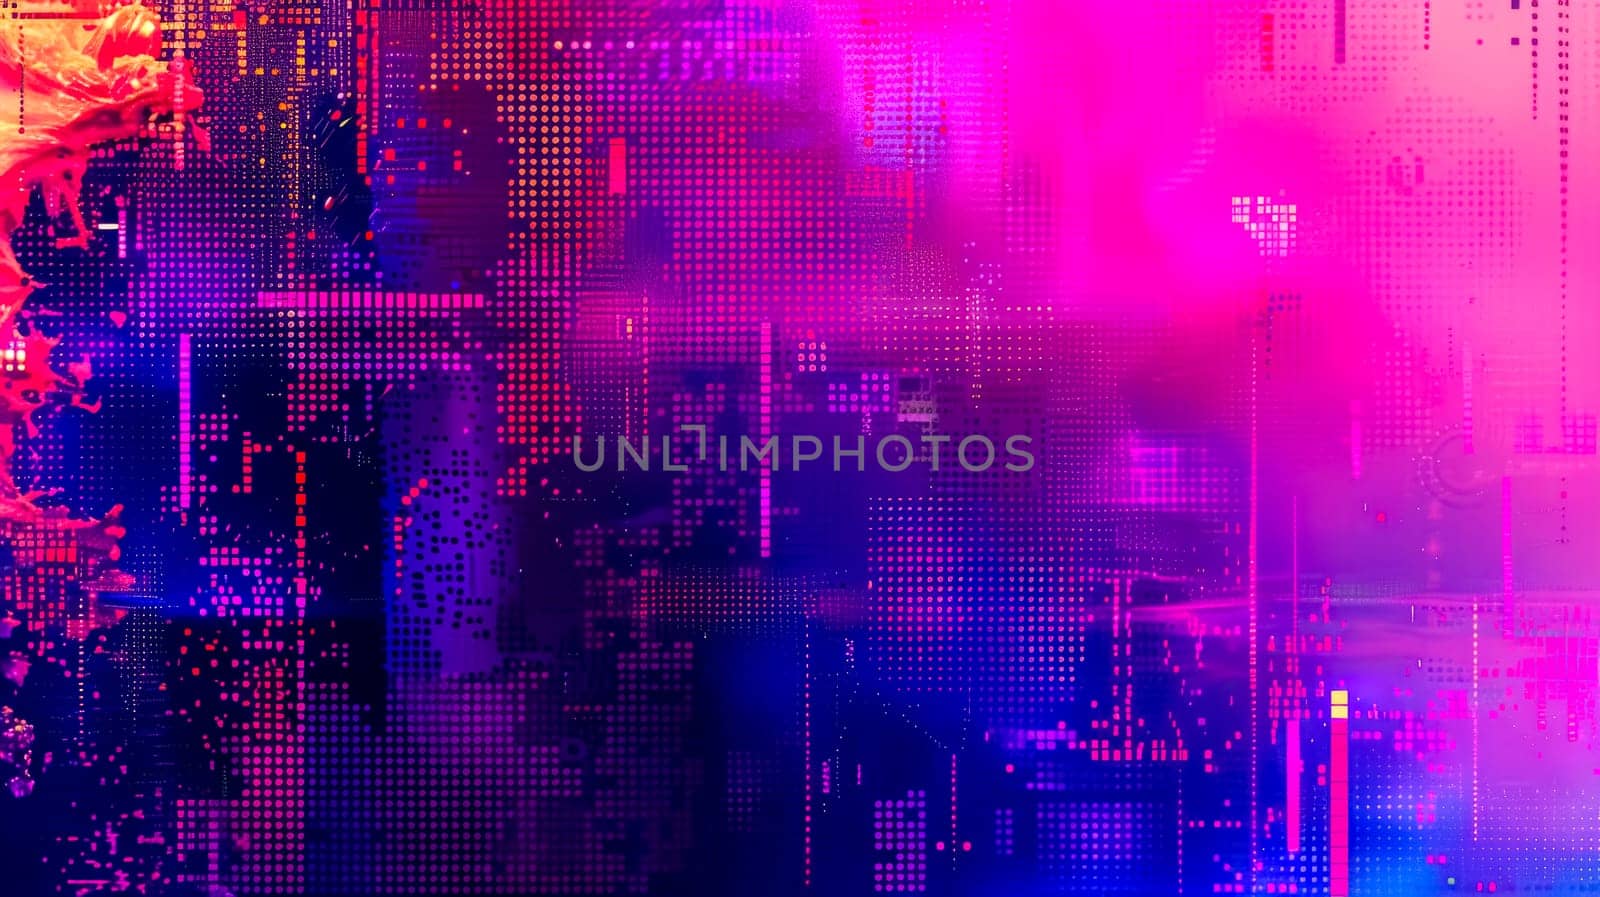 Abstract digital artwork with colorful pixels by Edophoto